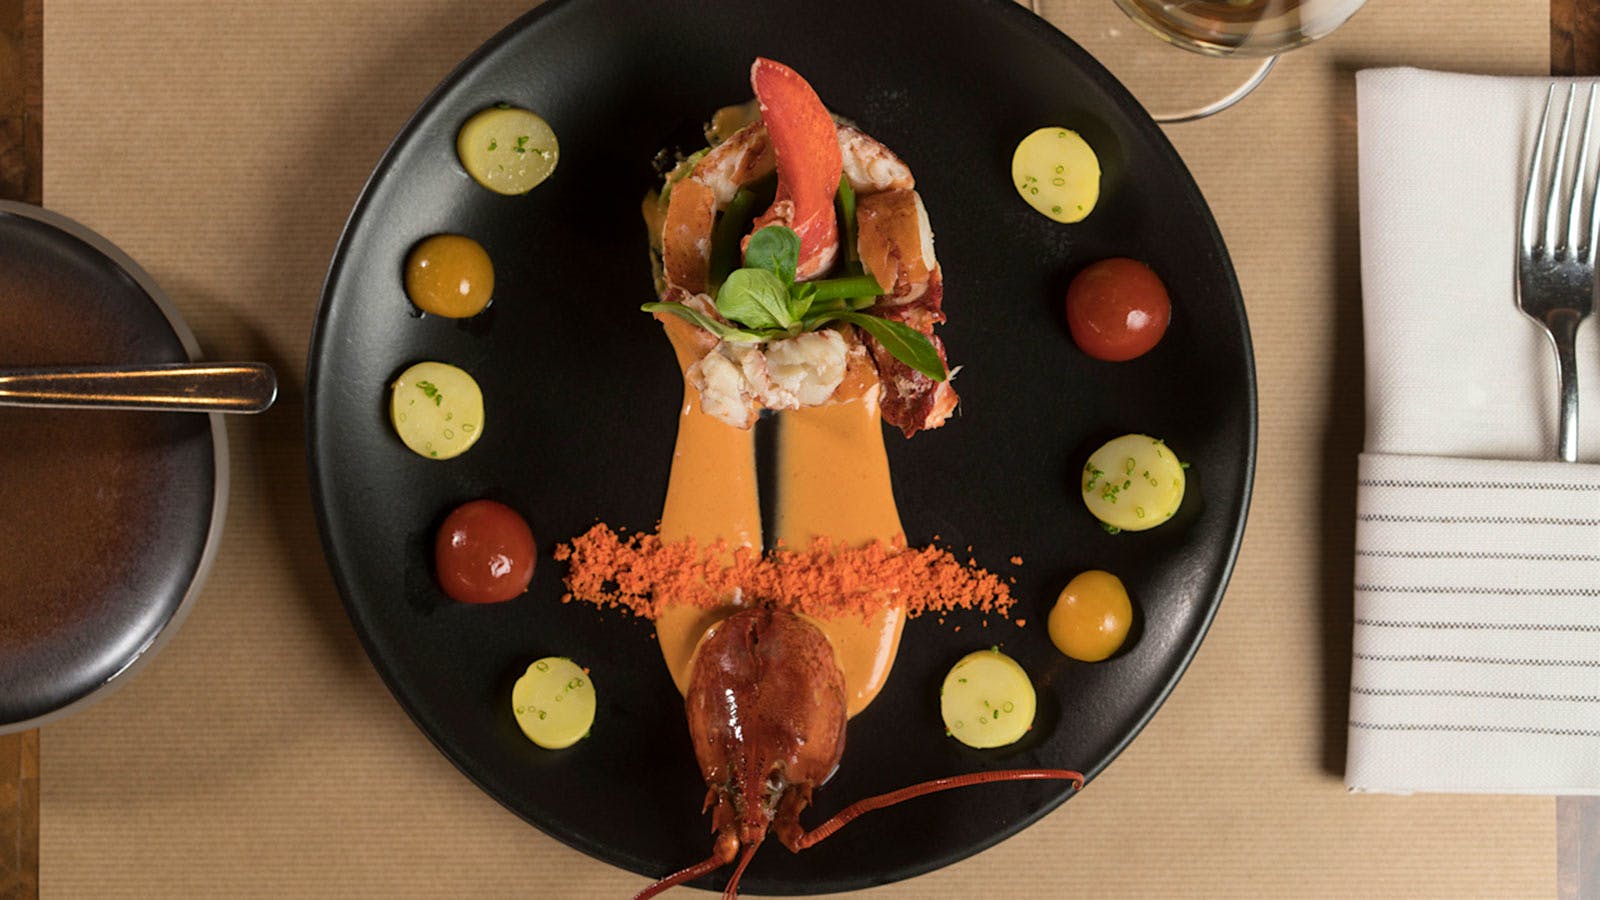 Roasted main lobster with a white wine